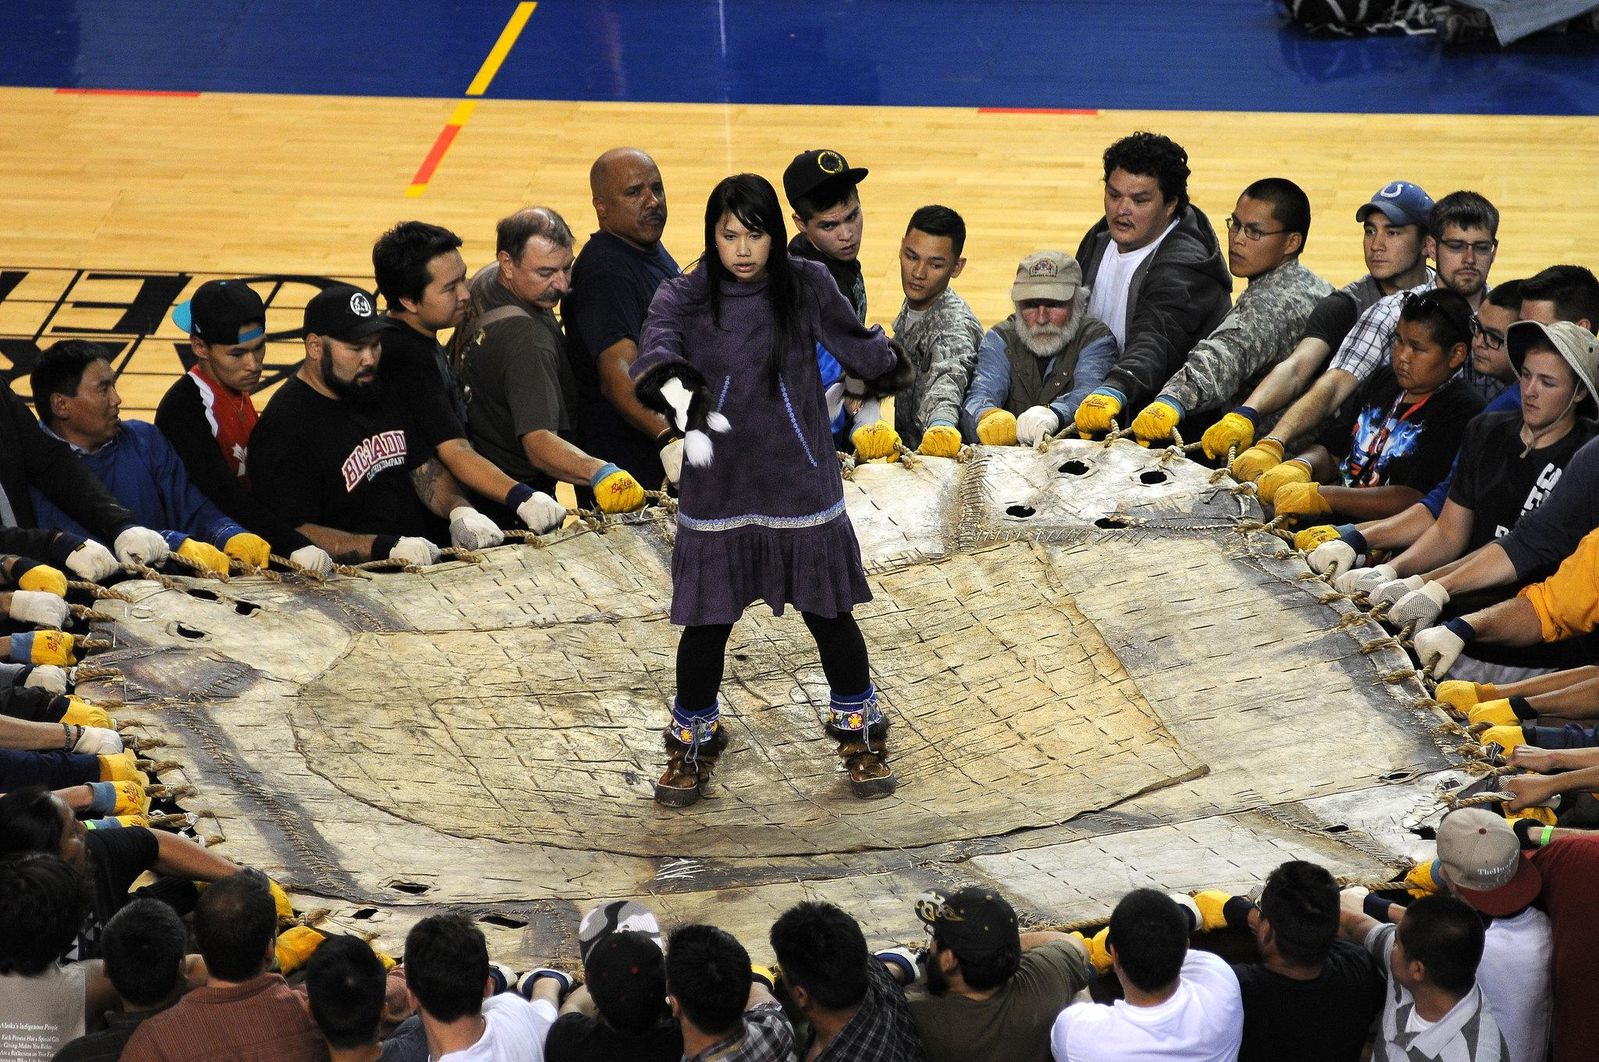 Alaska Native Blow Job - For More Than 60 Years, Indigenous Alaskans Have Hosted Their Own Olympics  | Travel| Smithsonian Magazine